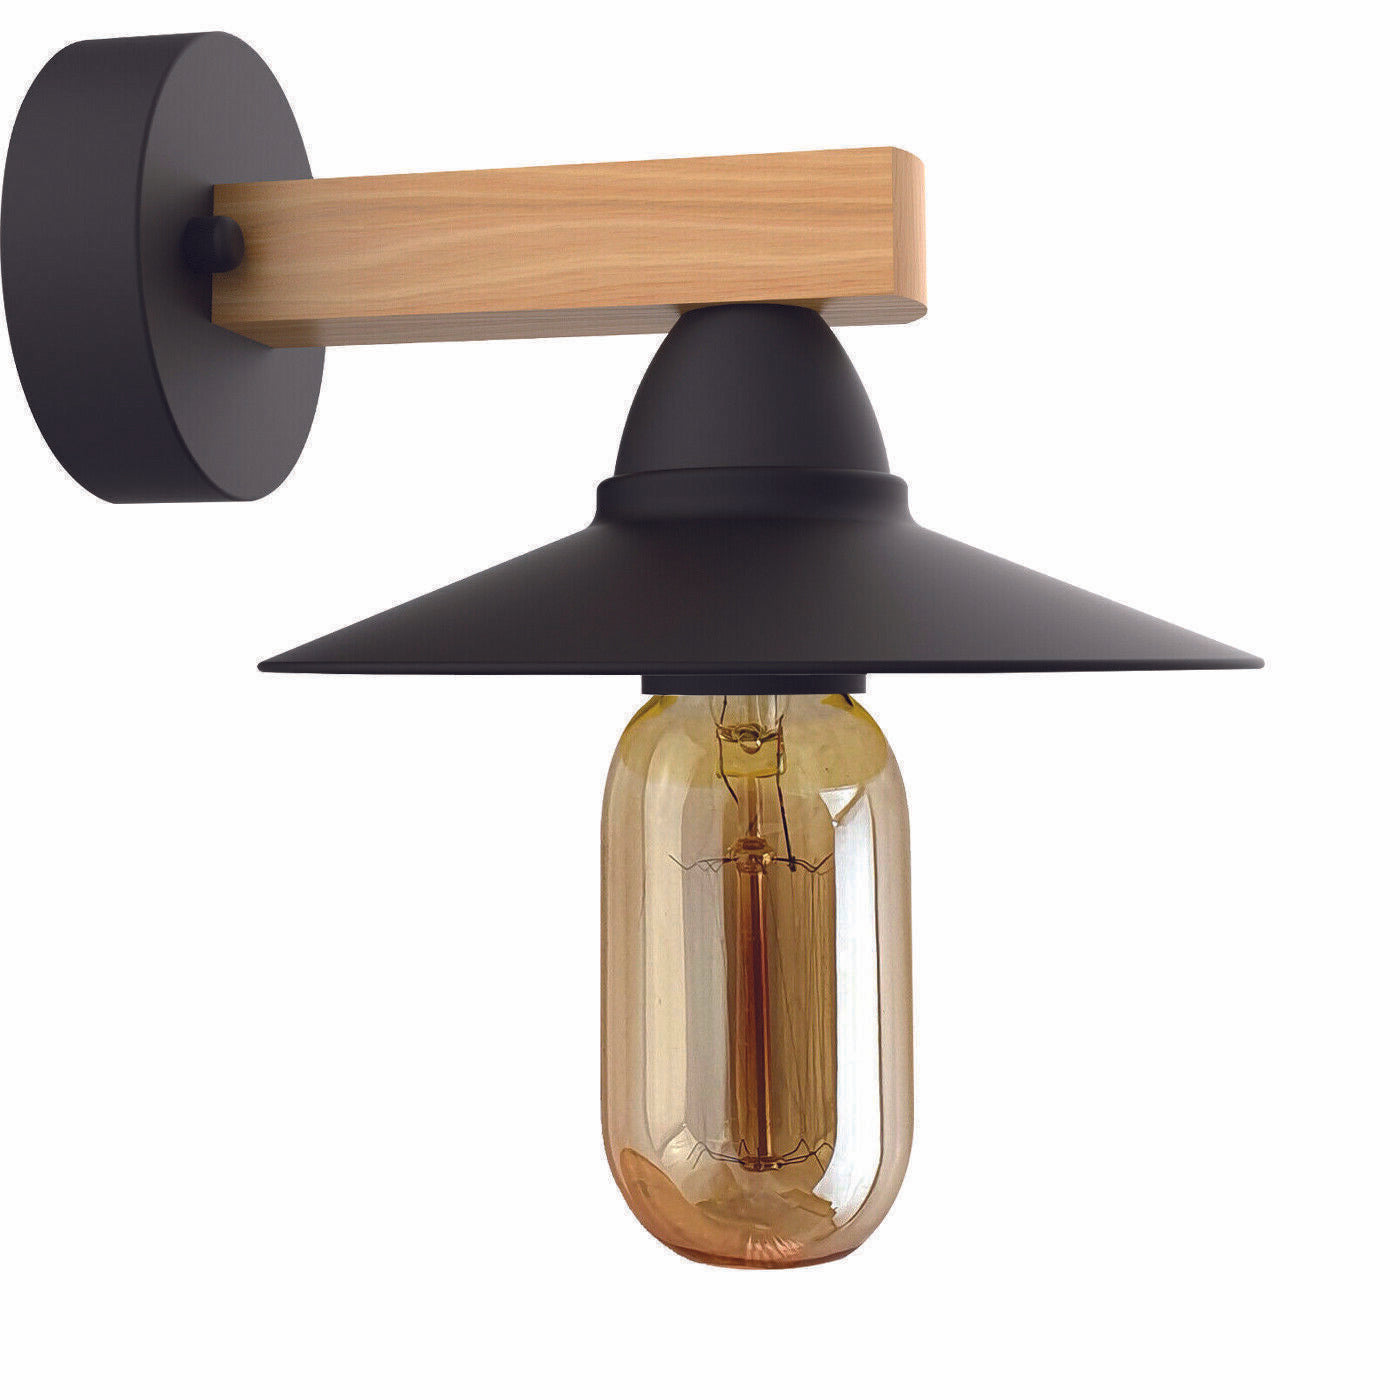 Contemporary Wooden PVC Wall Sconce - E27 Stylish Indoor Lighting